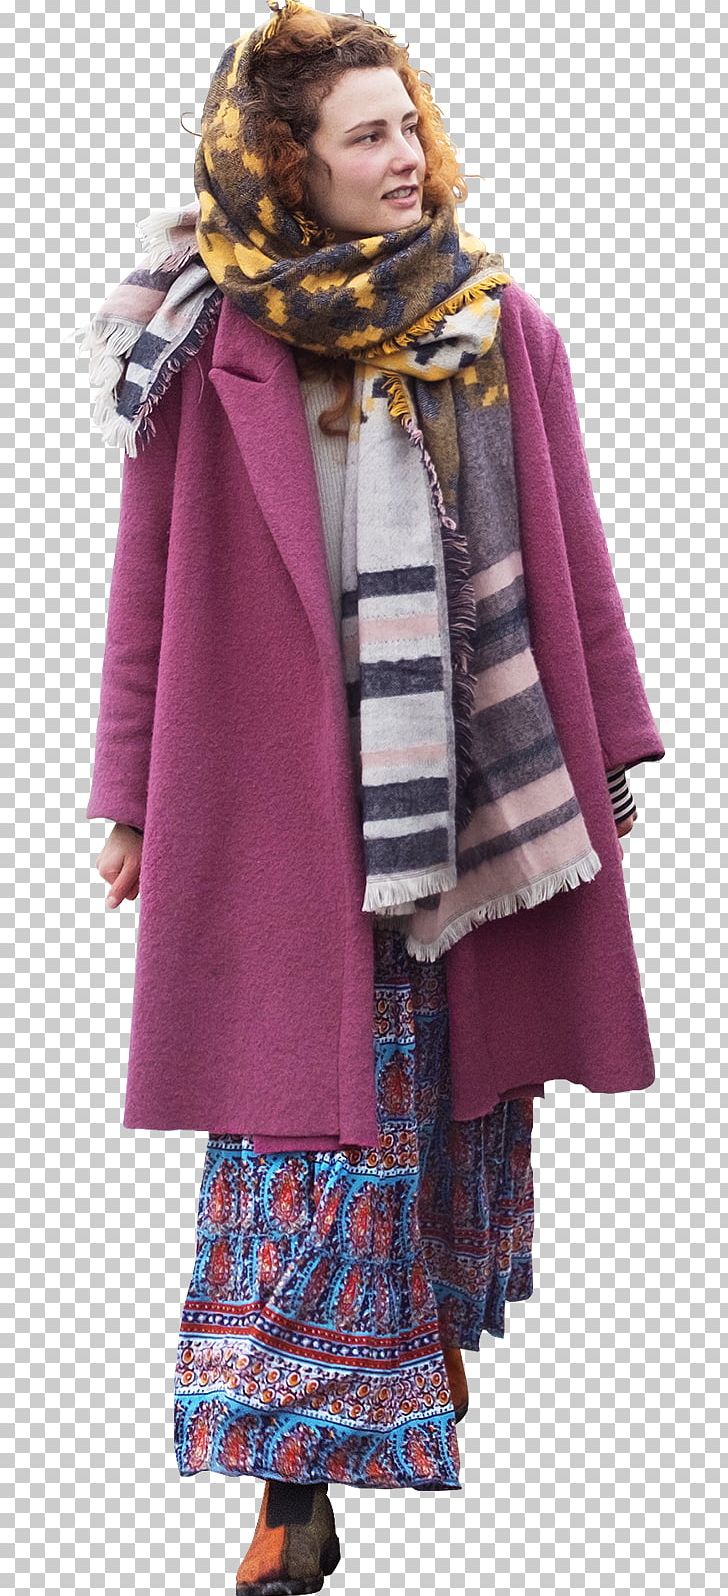 Scarf Clothing Outerwear Coat PNG, Clipart, Botanical Garden, Clothing, Coat, Commuting, Costume Free PNG Download